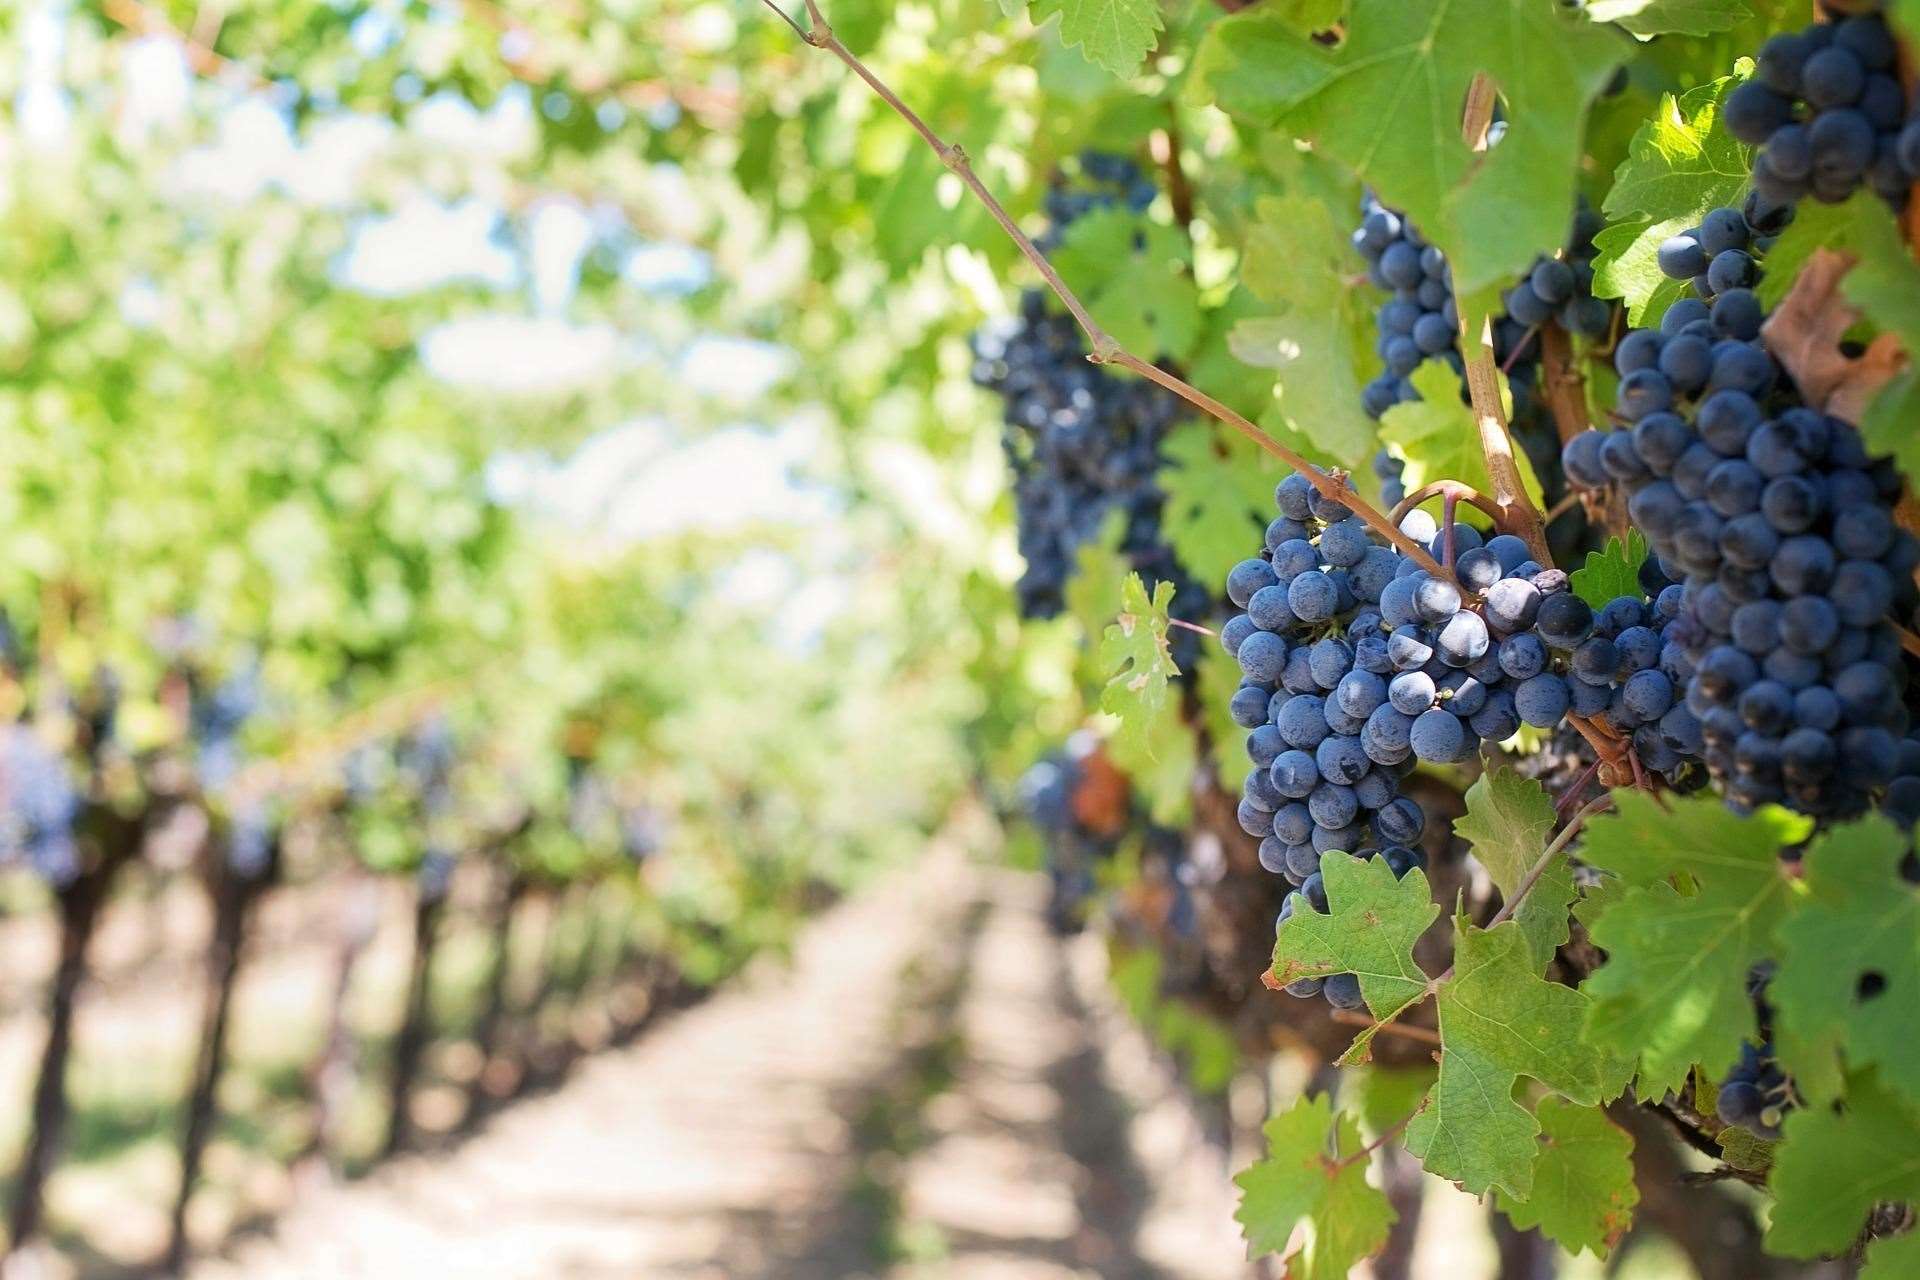 The humble grape has spawned a major industry which shows no sign of slowing in the county